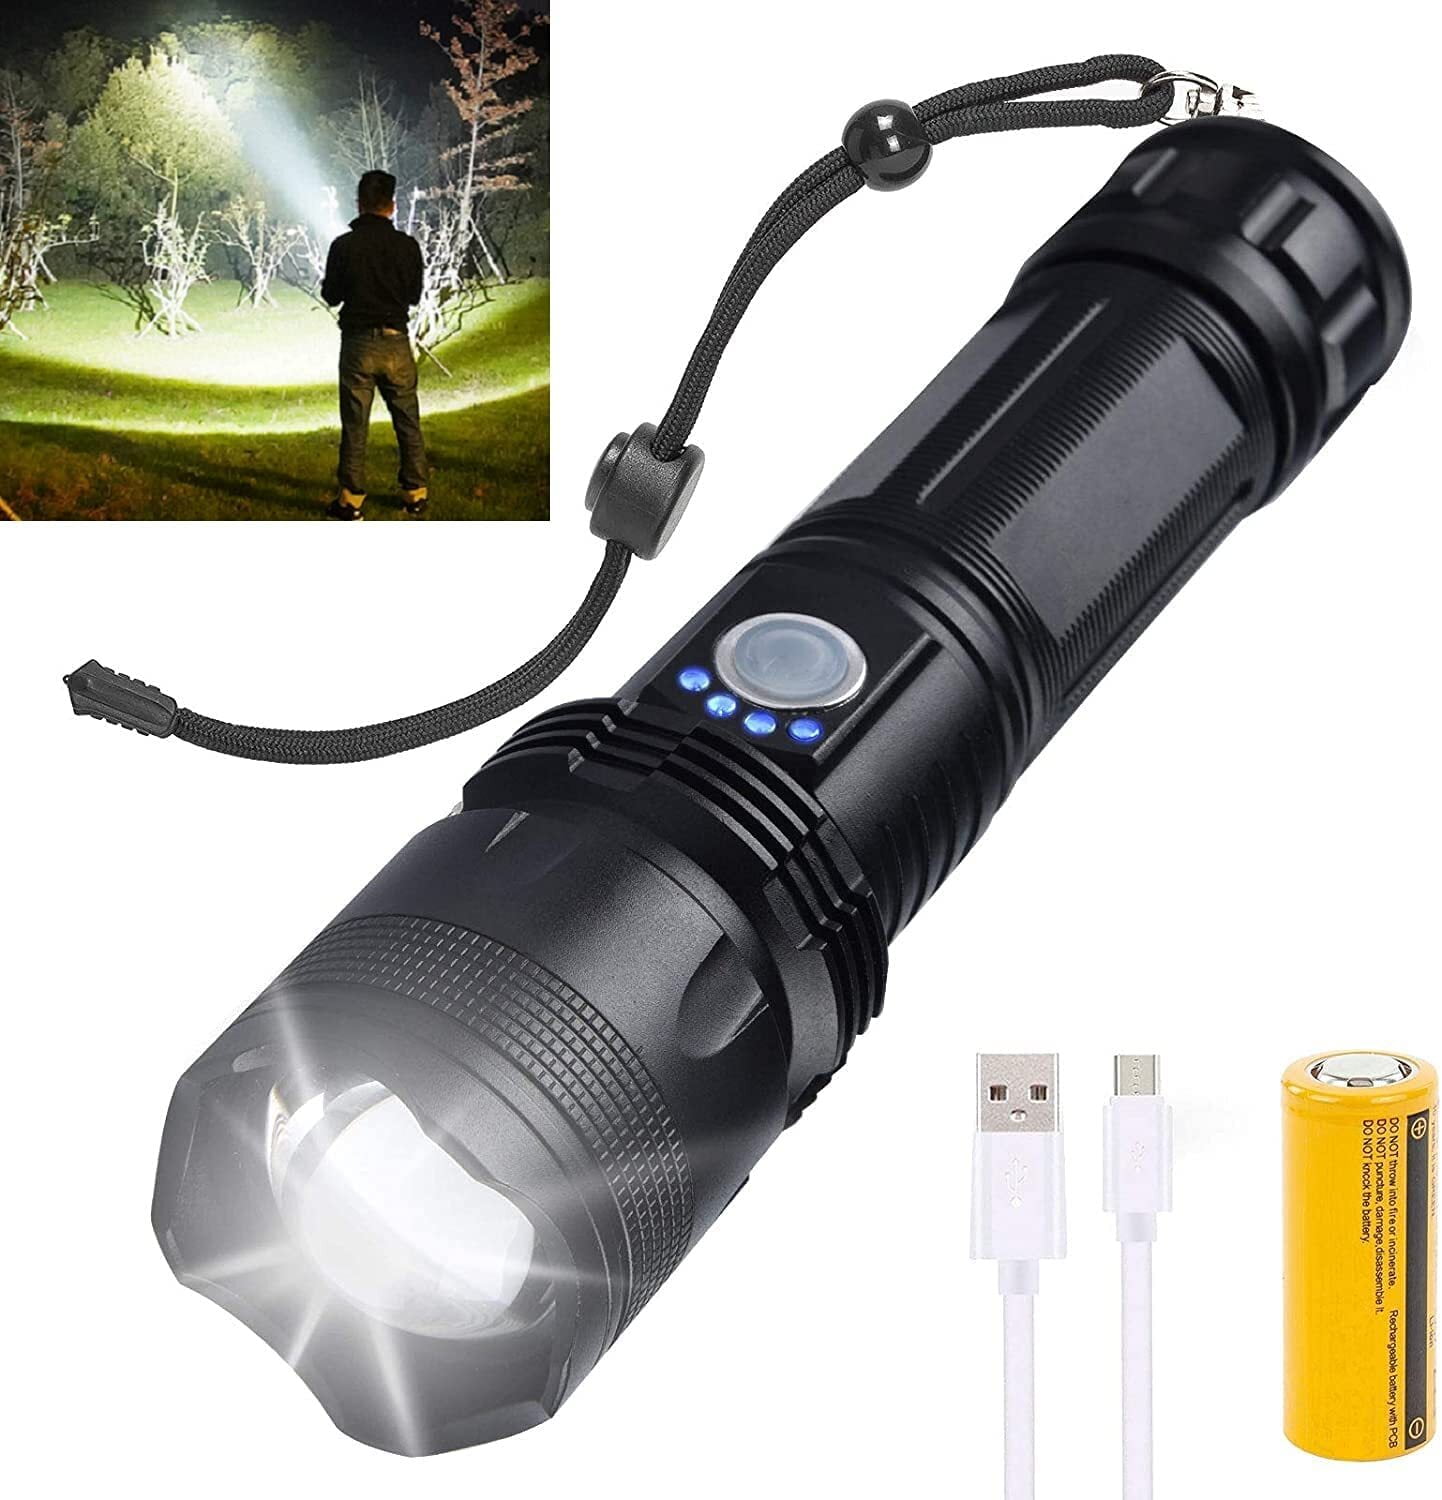 Flashlight LED High Lumen Rechargeable High-Powered Waterproof Camping Emergency Working Tactical Portable Outdoor Torch Handheld 4-In-1 Floodlight & Spotlight & SOS Light & Power Bank 10000 mAh